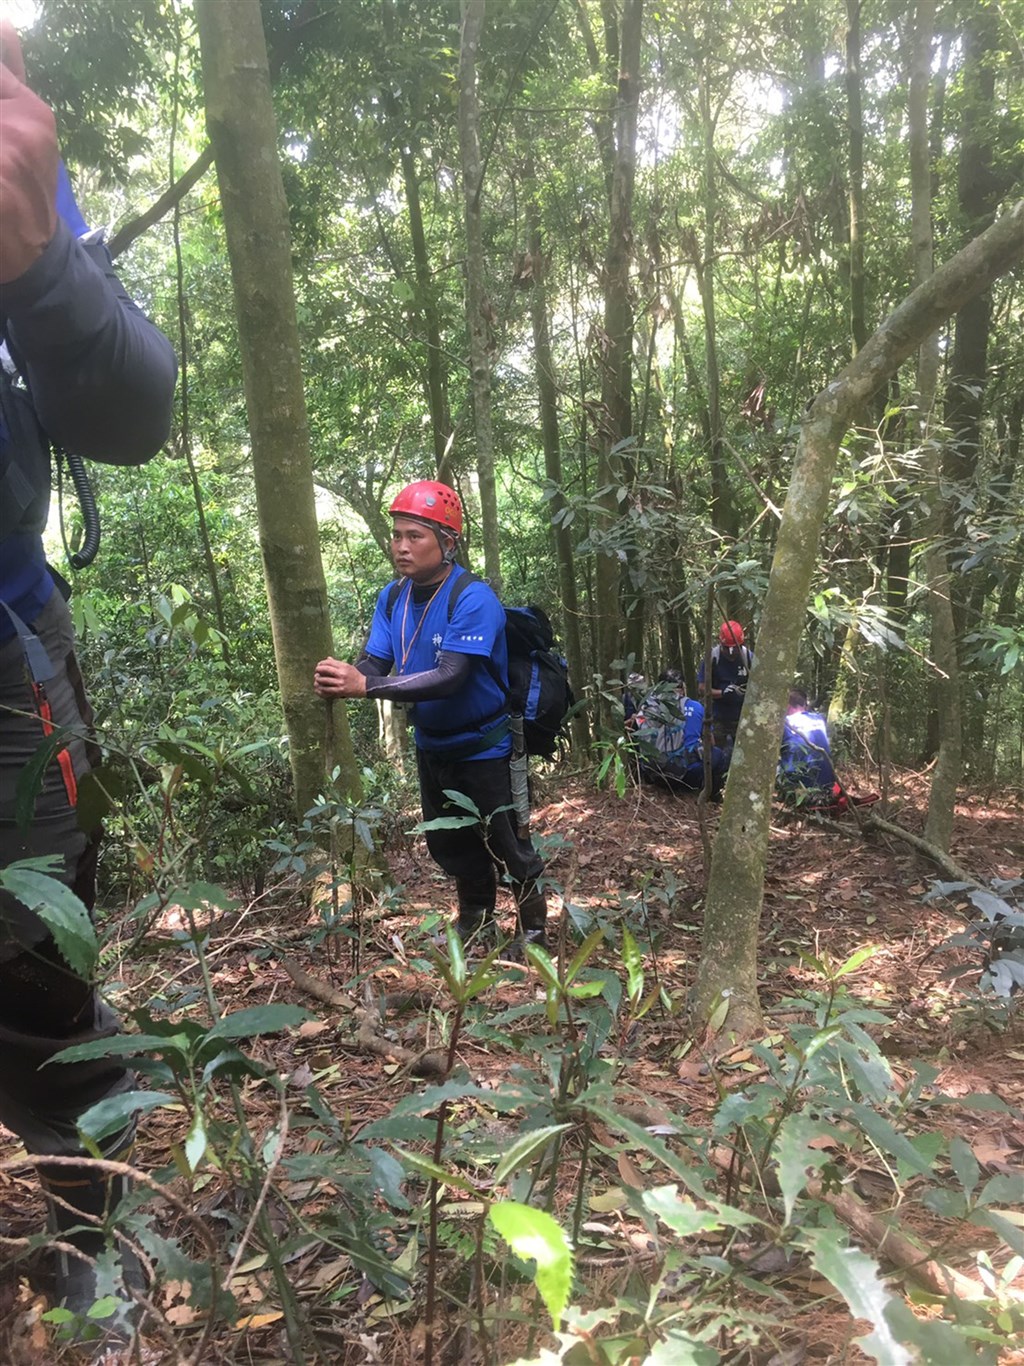 Body of Vietnamese migrant found, one week after hiking accident - Focus  Taiwan